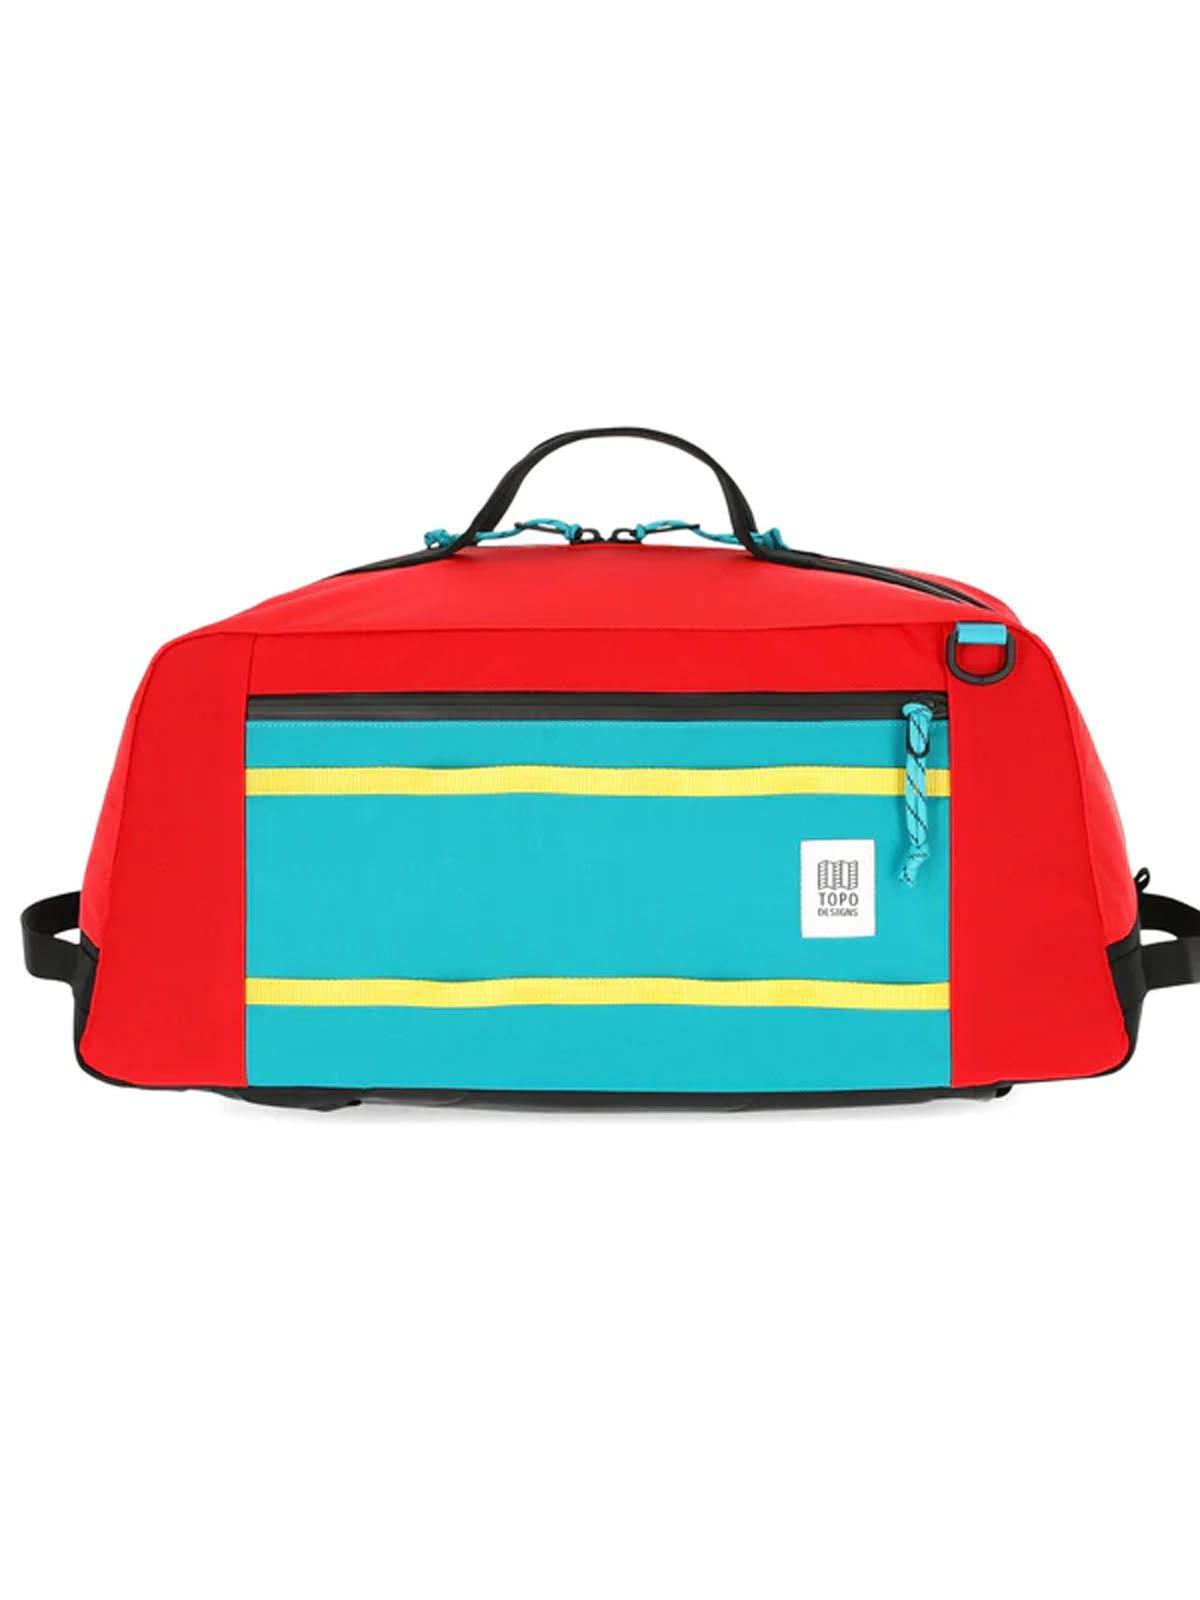 Topo Designs Mountain Duffel Red Turquoise